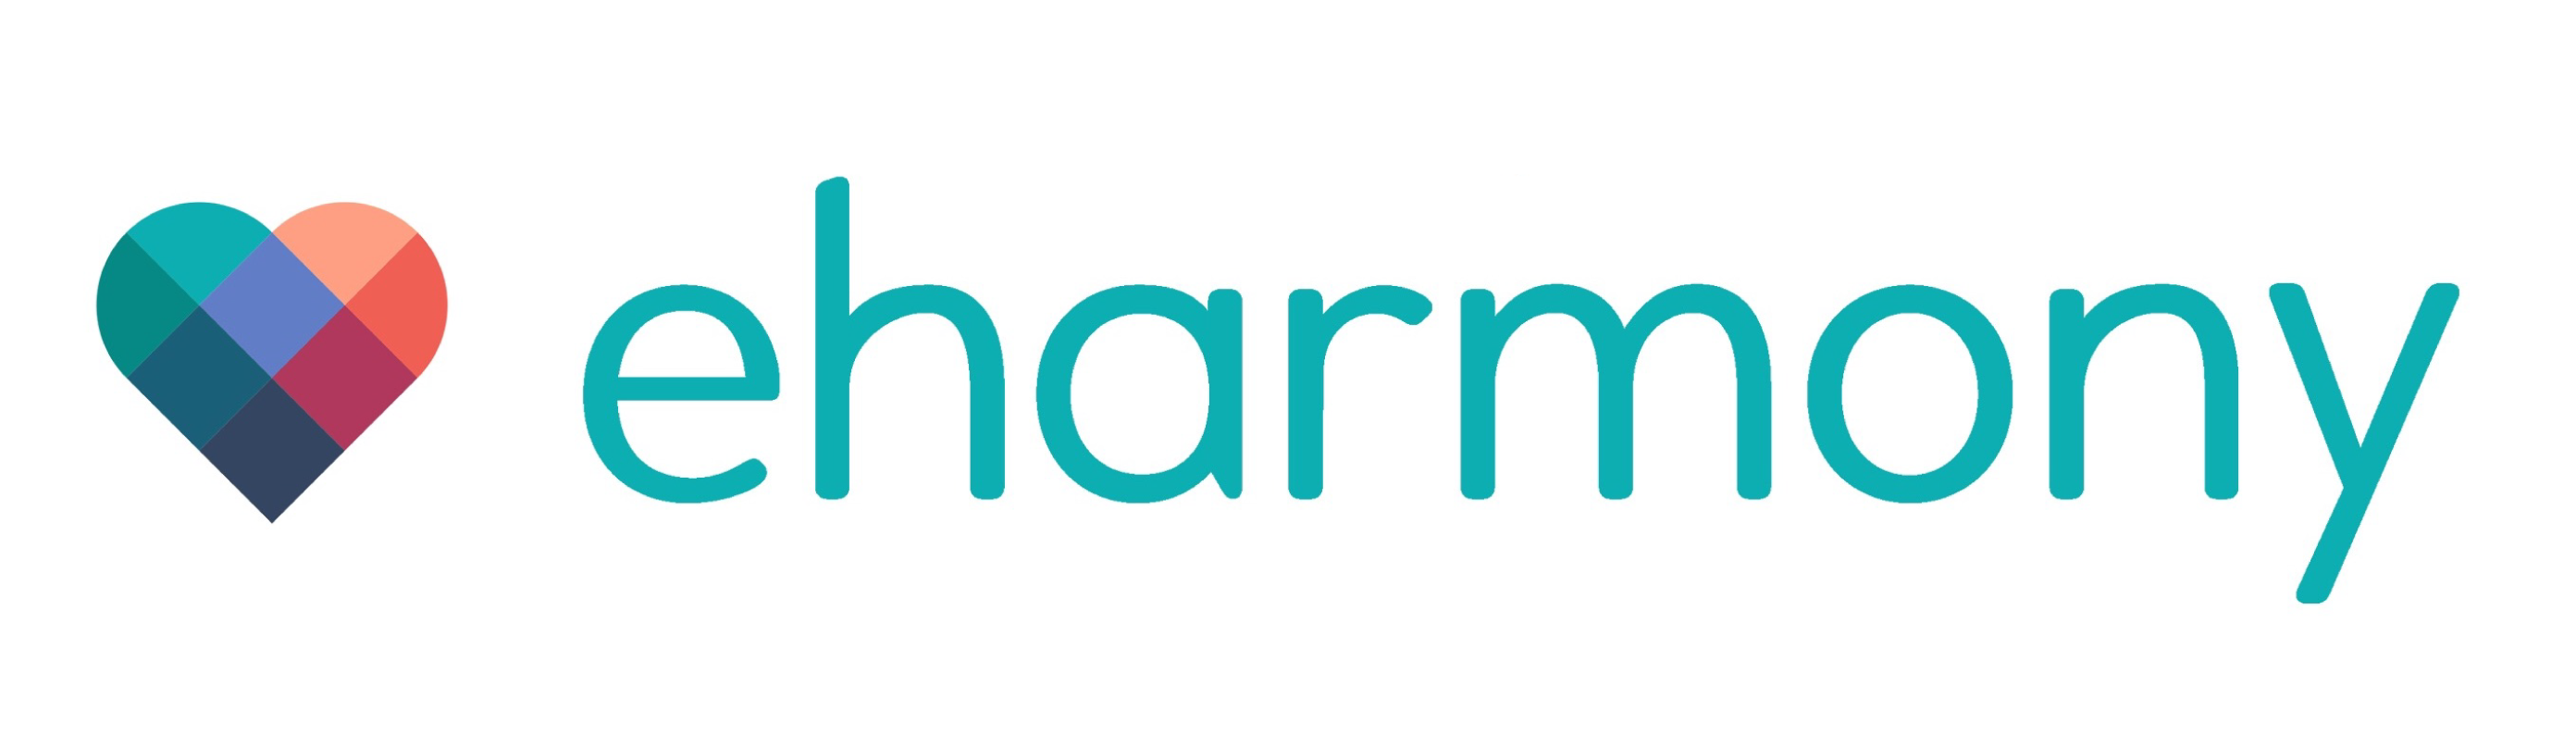 eHarmony Review December 2022: Just Fakes or Real Dates? - DatingScout